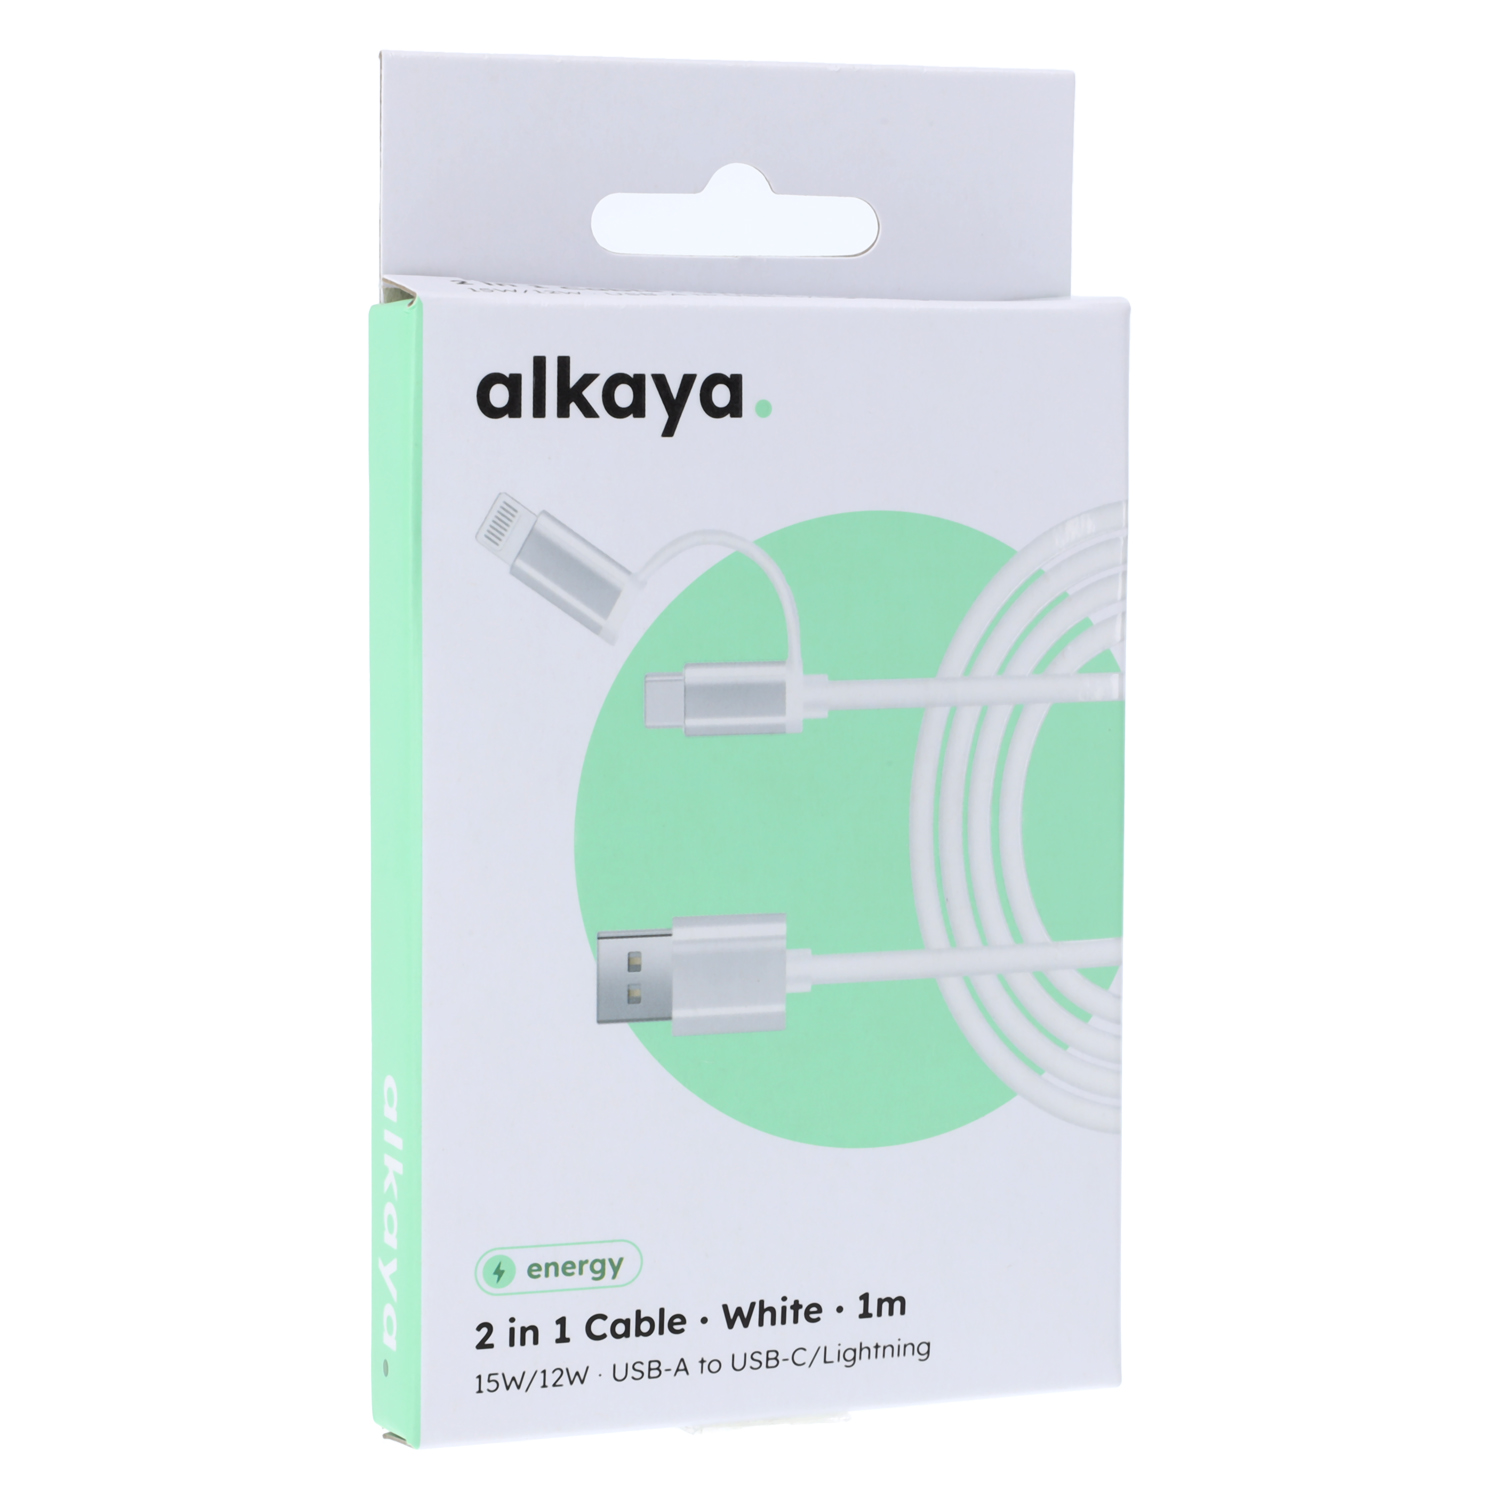 alkaya. | Speed Flex 2 in 1 Data Cable High Gloss Universal Compatible USB-A to USB-C + Lightning | 1m | 15W/12W, White